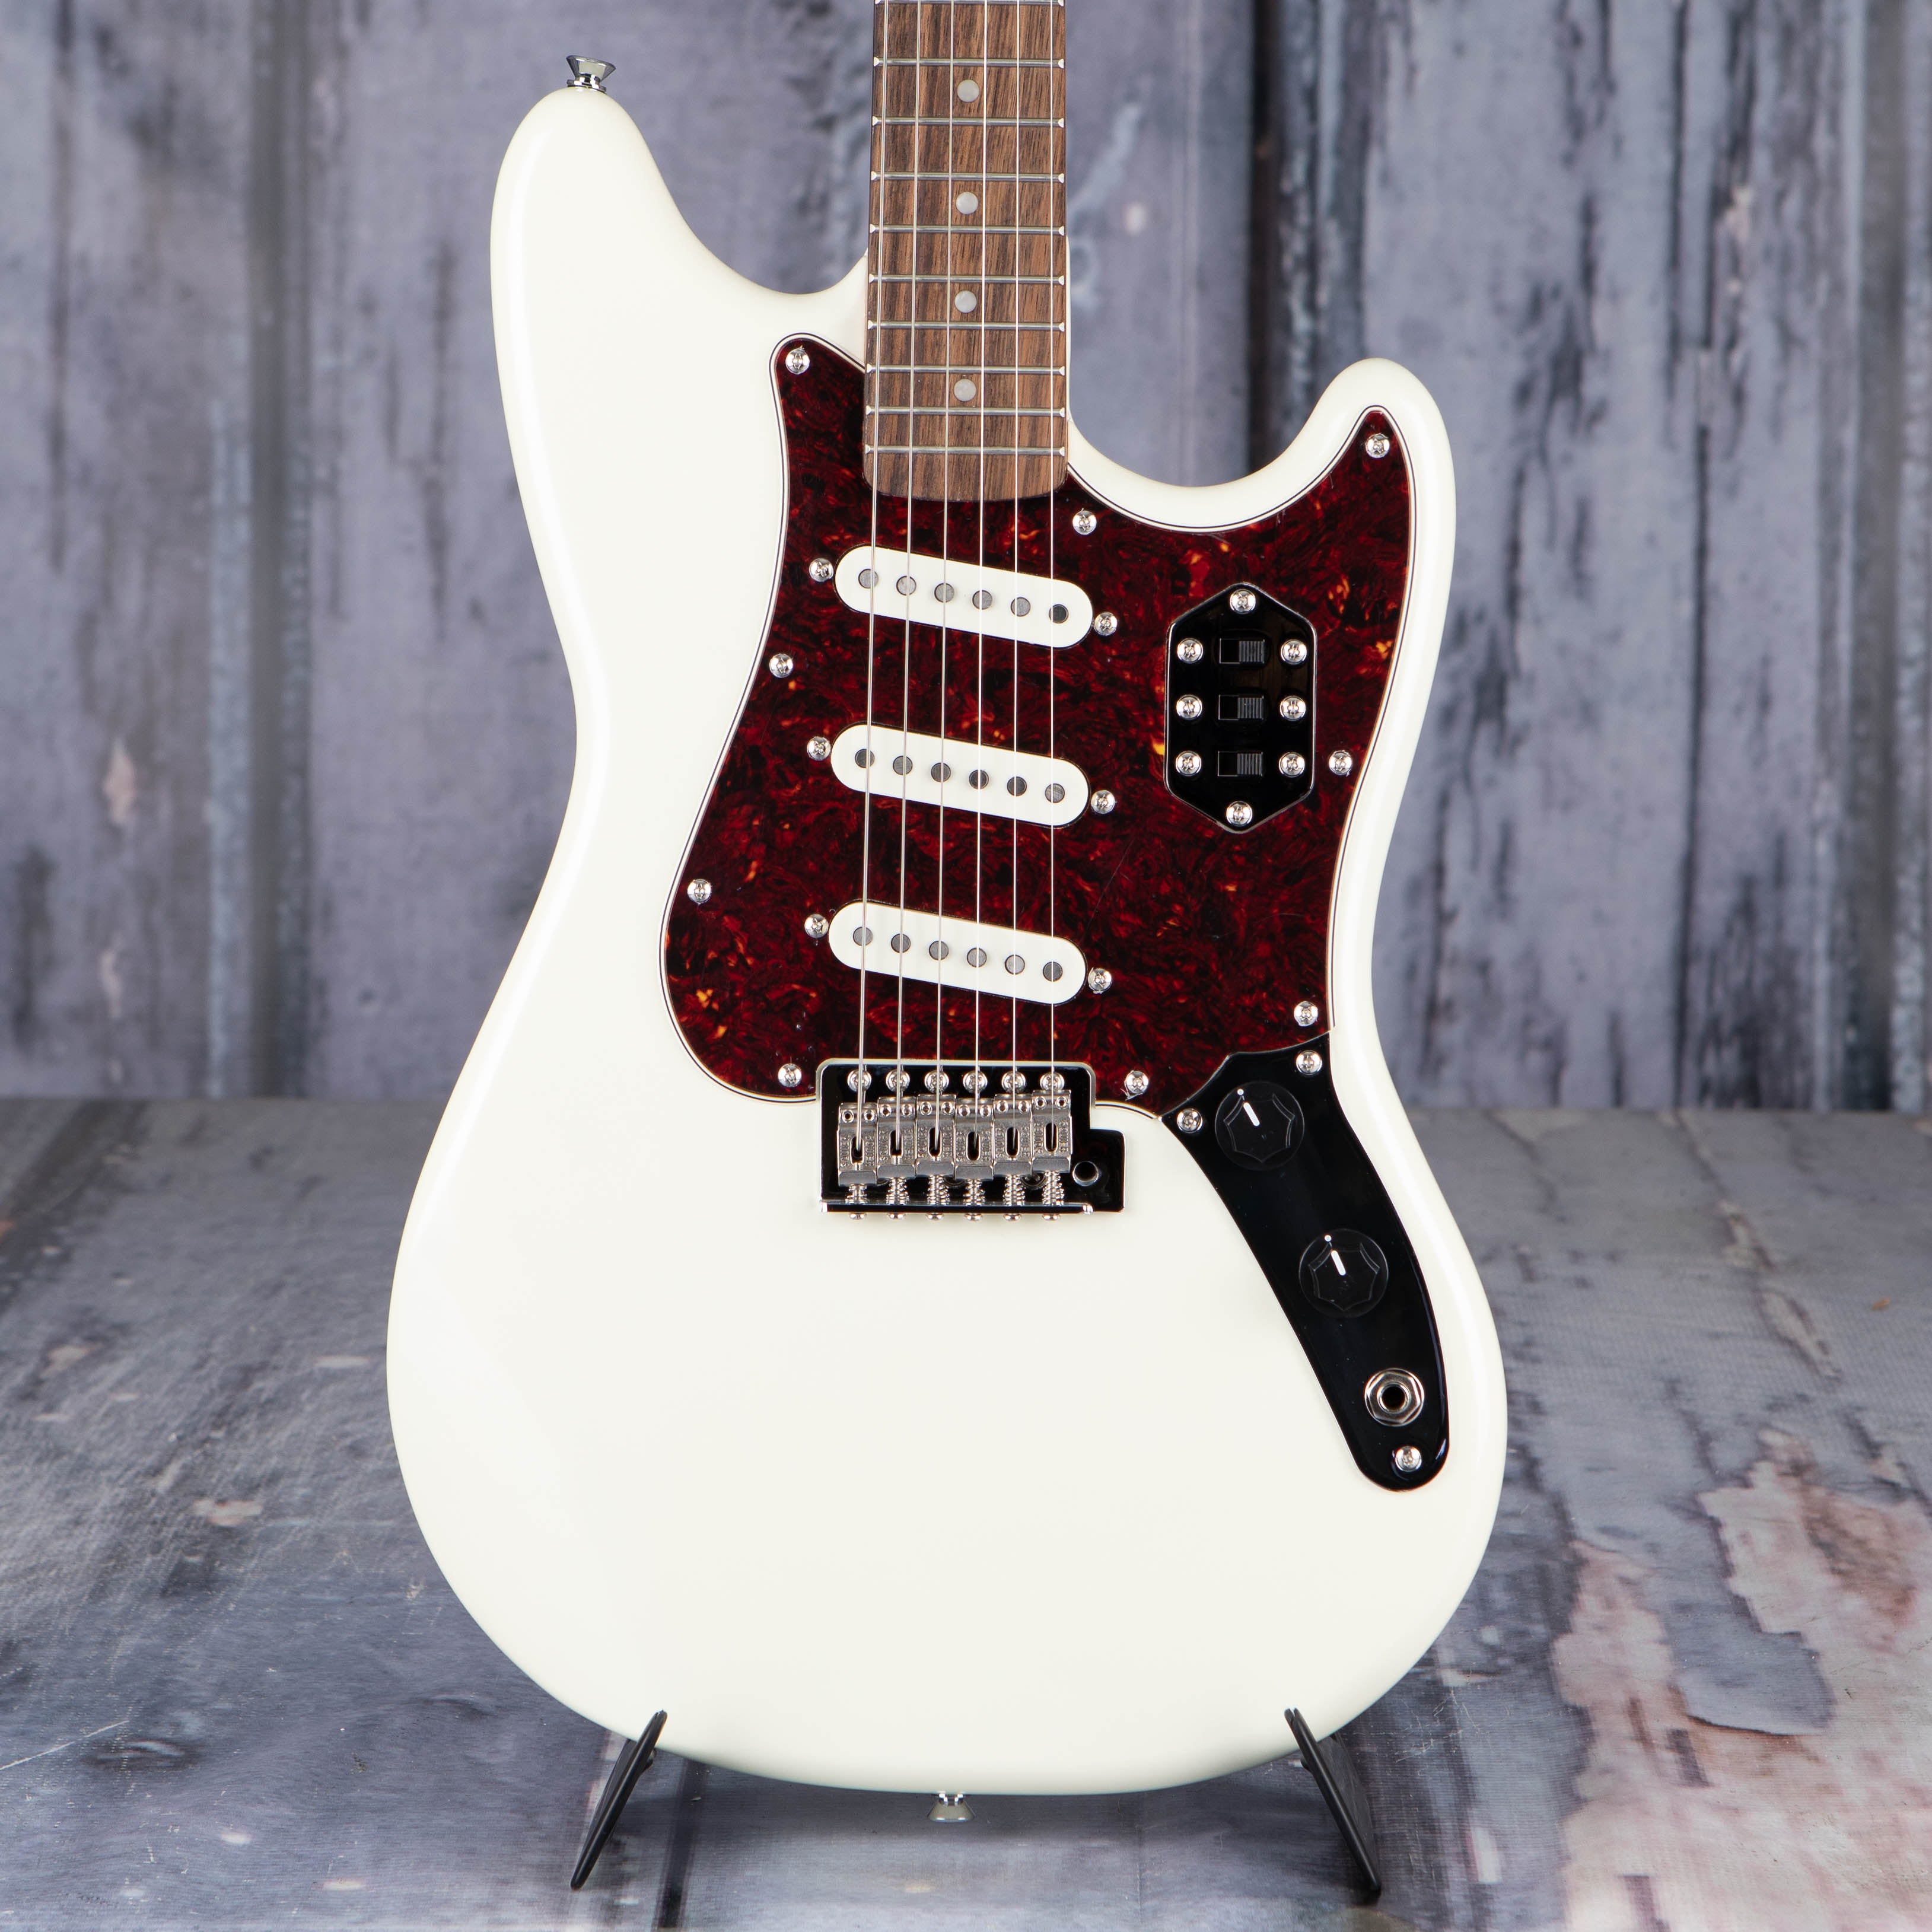 Squier Paranormal Cyclone Electric Guitar, Pearl White